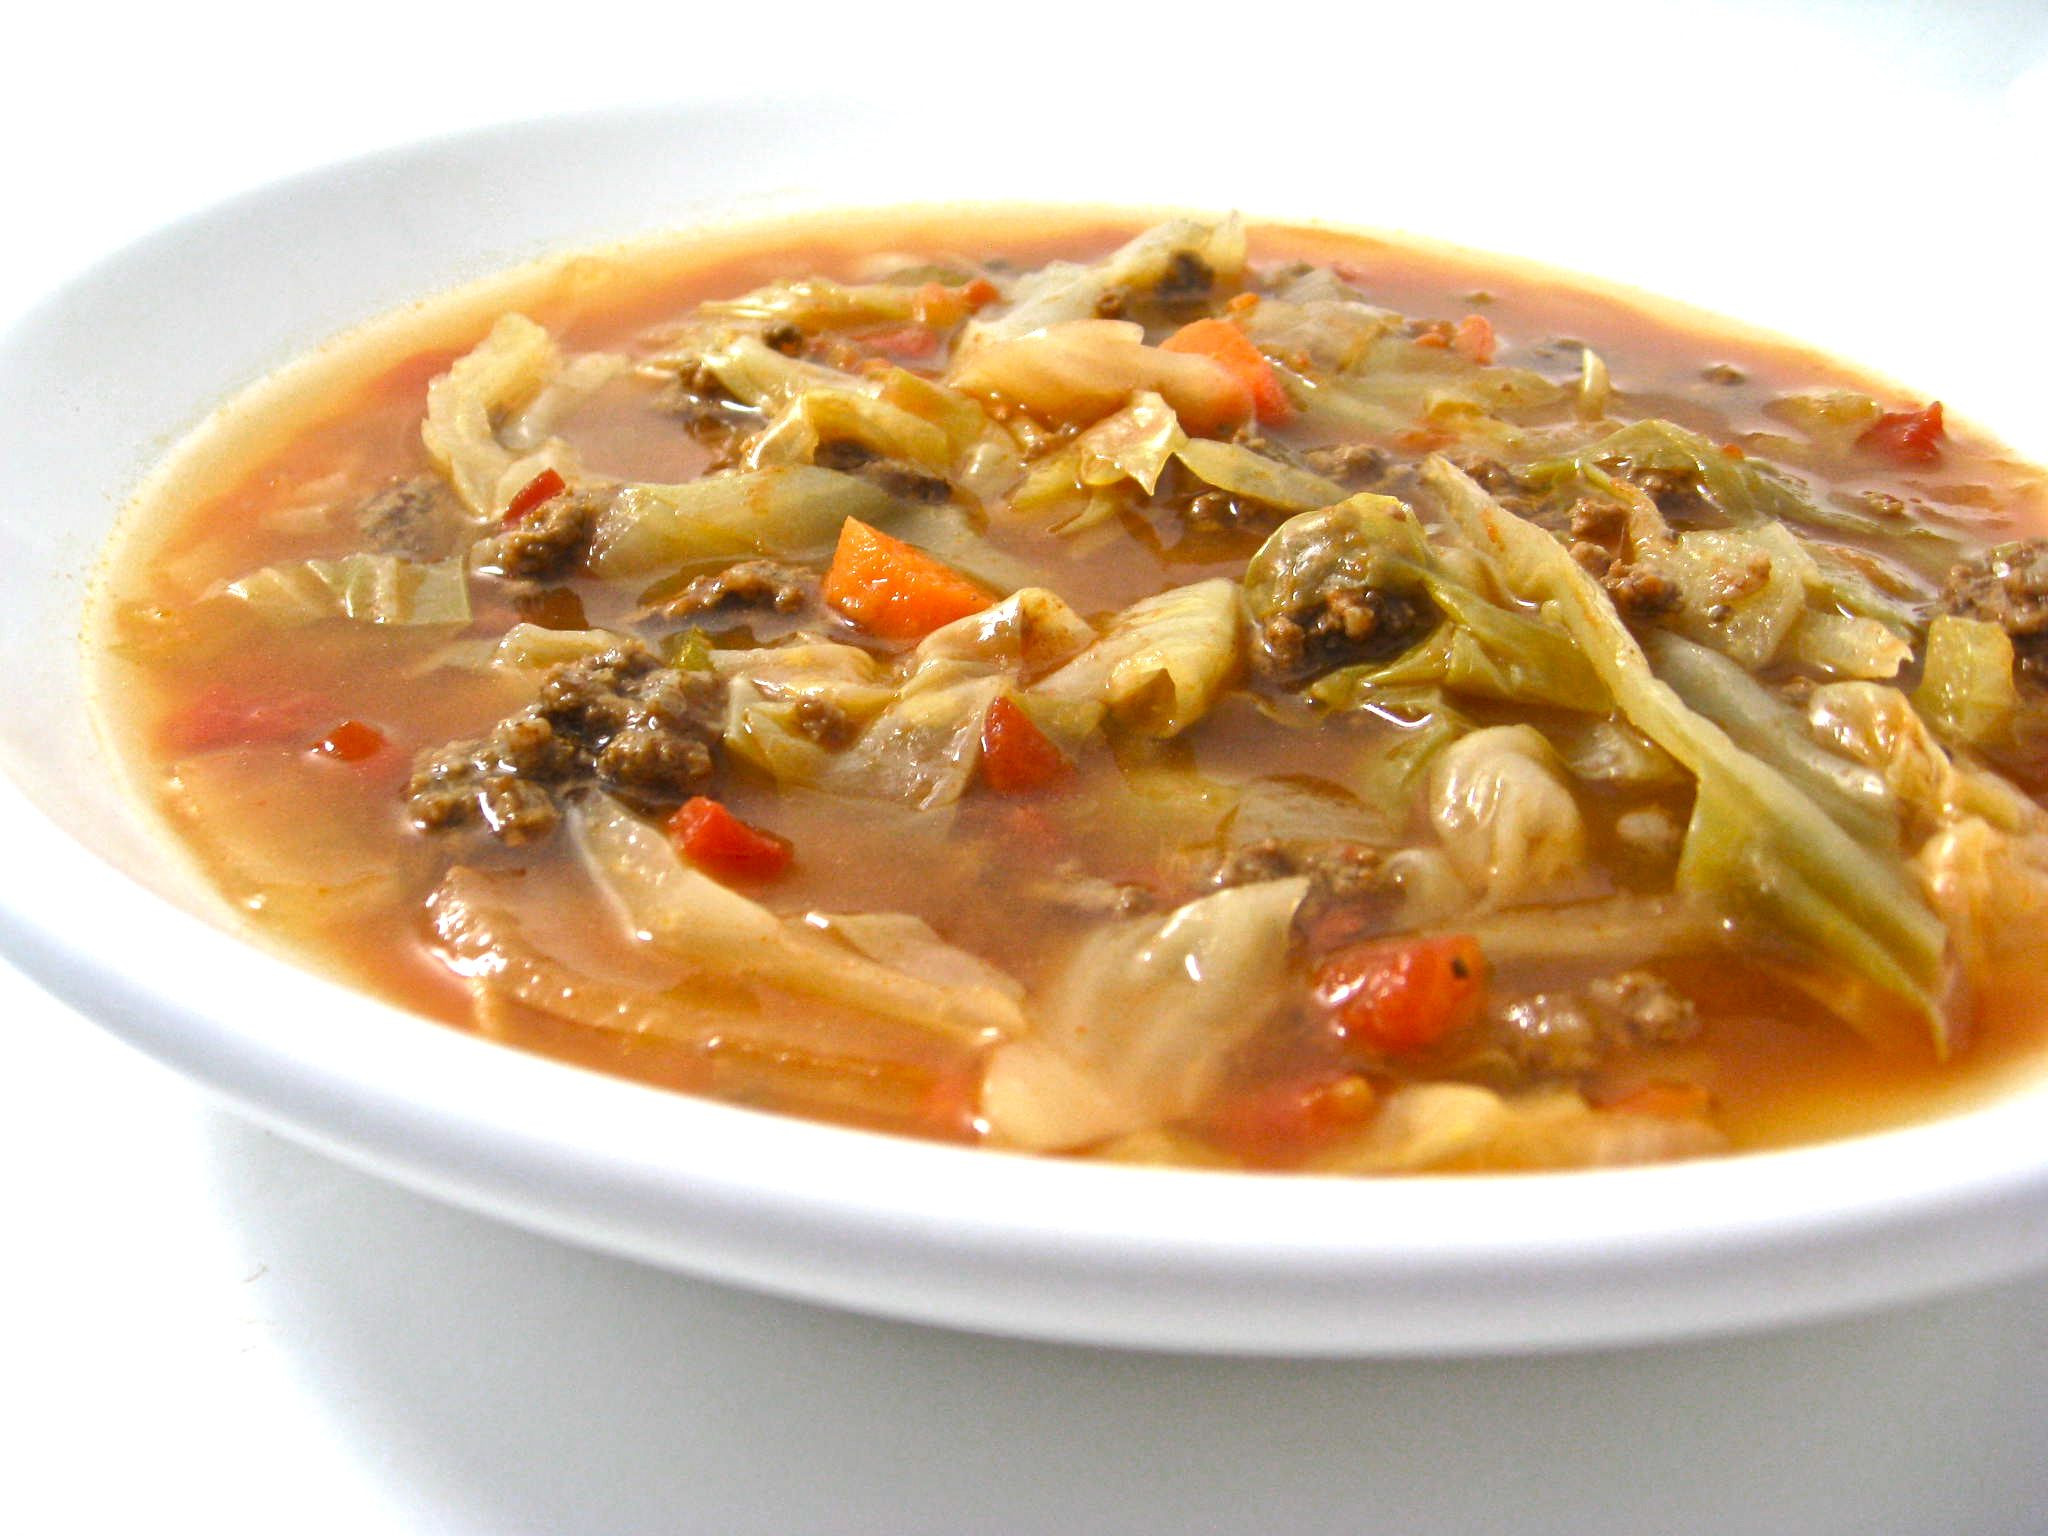 Weight Watchers Cabbage Soup With Ground Beef
 Super Skinny Sweet and Sour Cabbage Soup